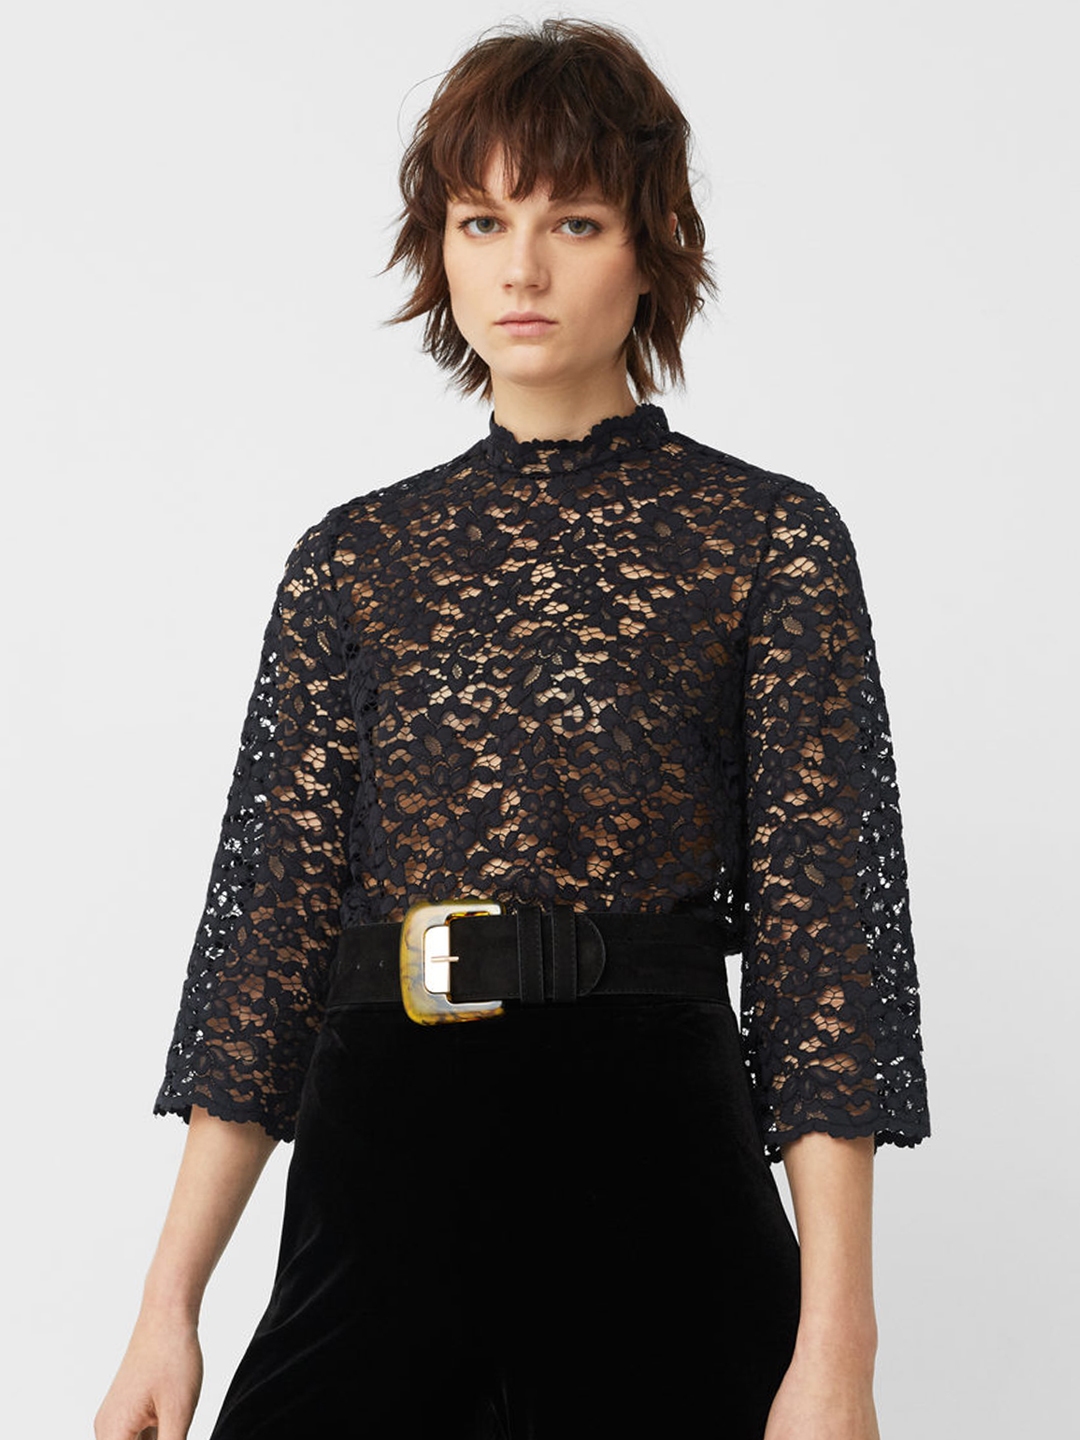 Mango short sleeve lace top in black